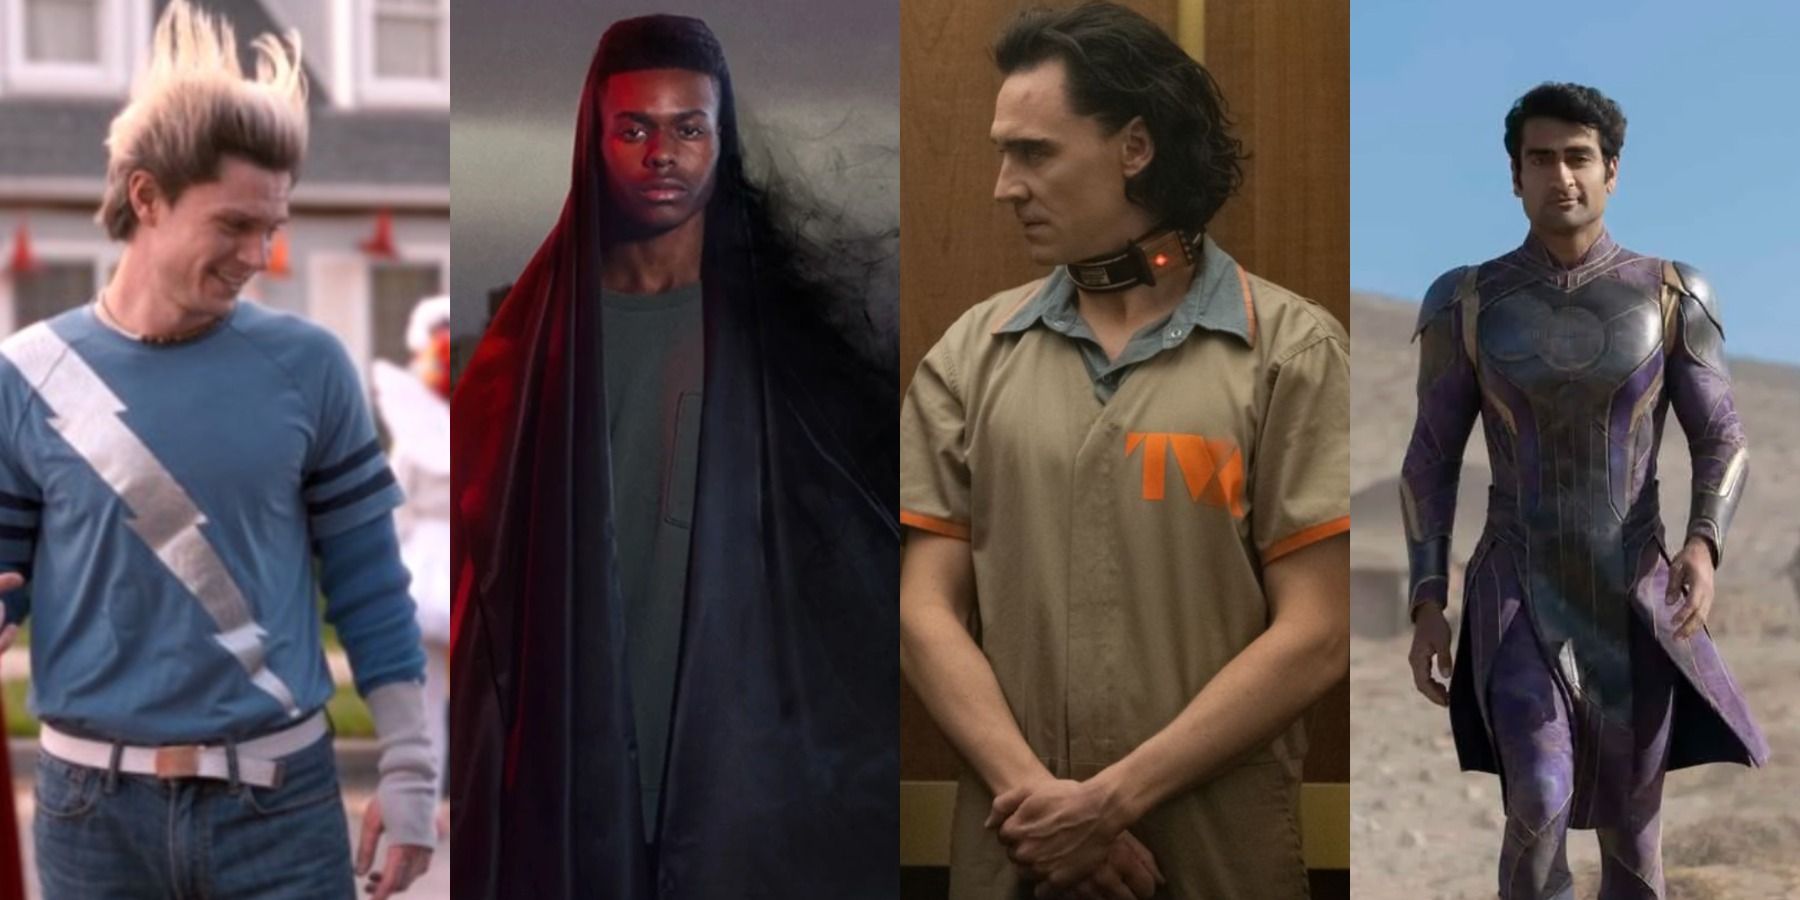 A split image depicts fake Pietro in WandaVision, Ty in Cloak and Dagger, Loki, and Kingo in Eternals